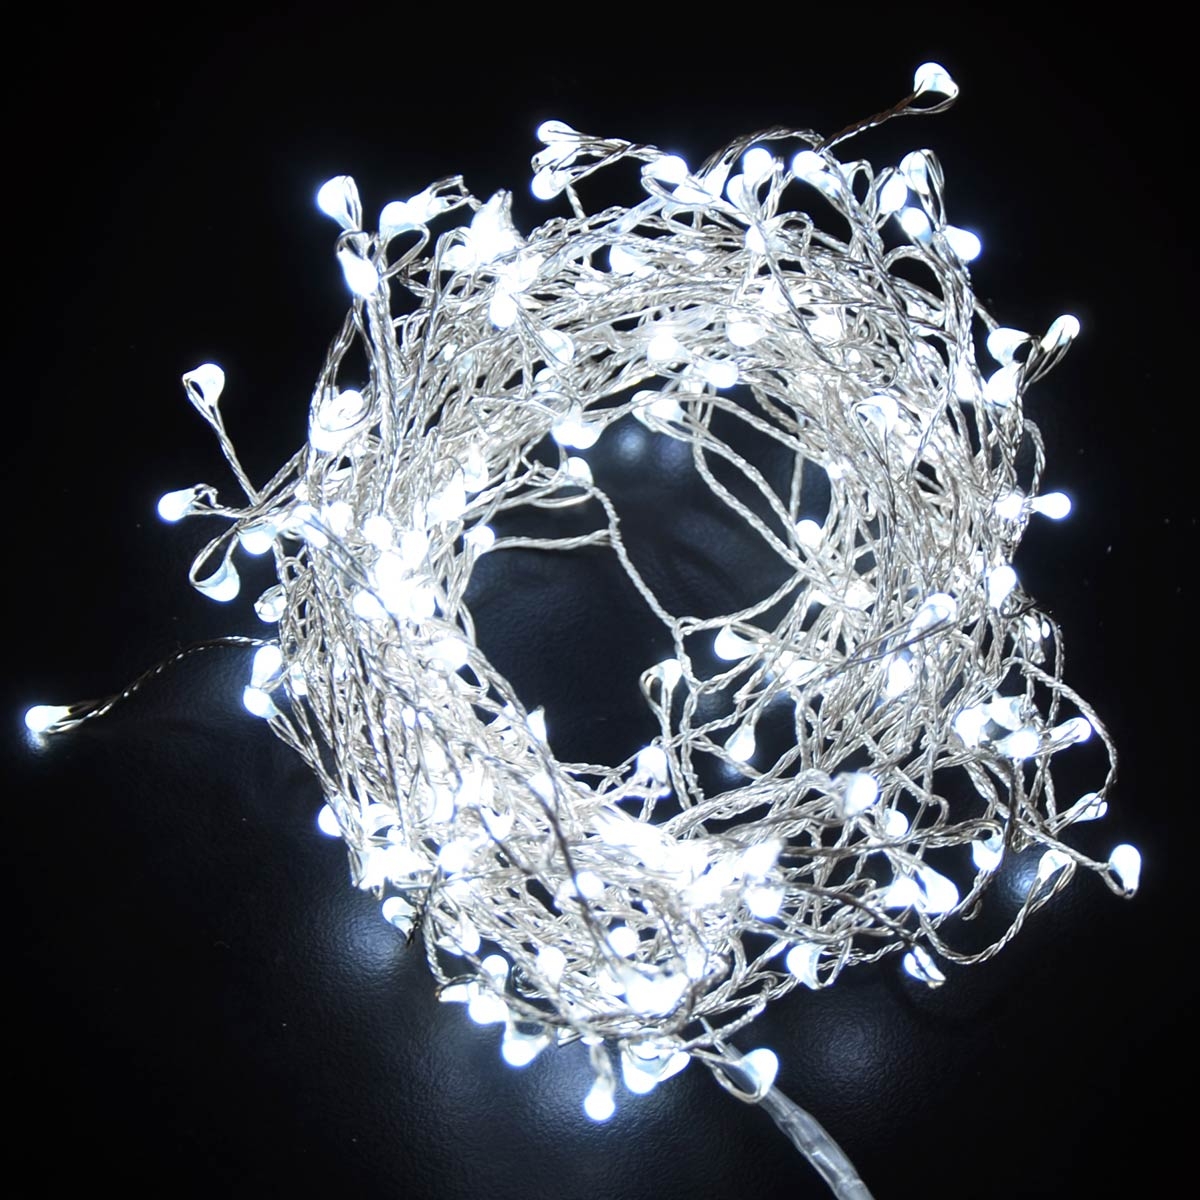 Icicle Cluster Light 200LED Steady On 200LED (3M) - Cold White